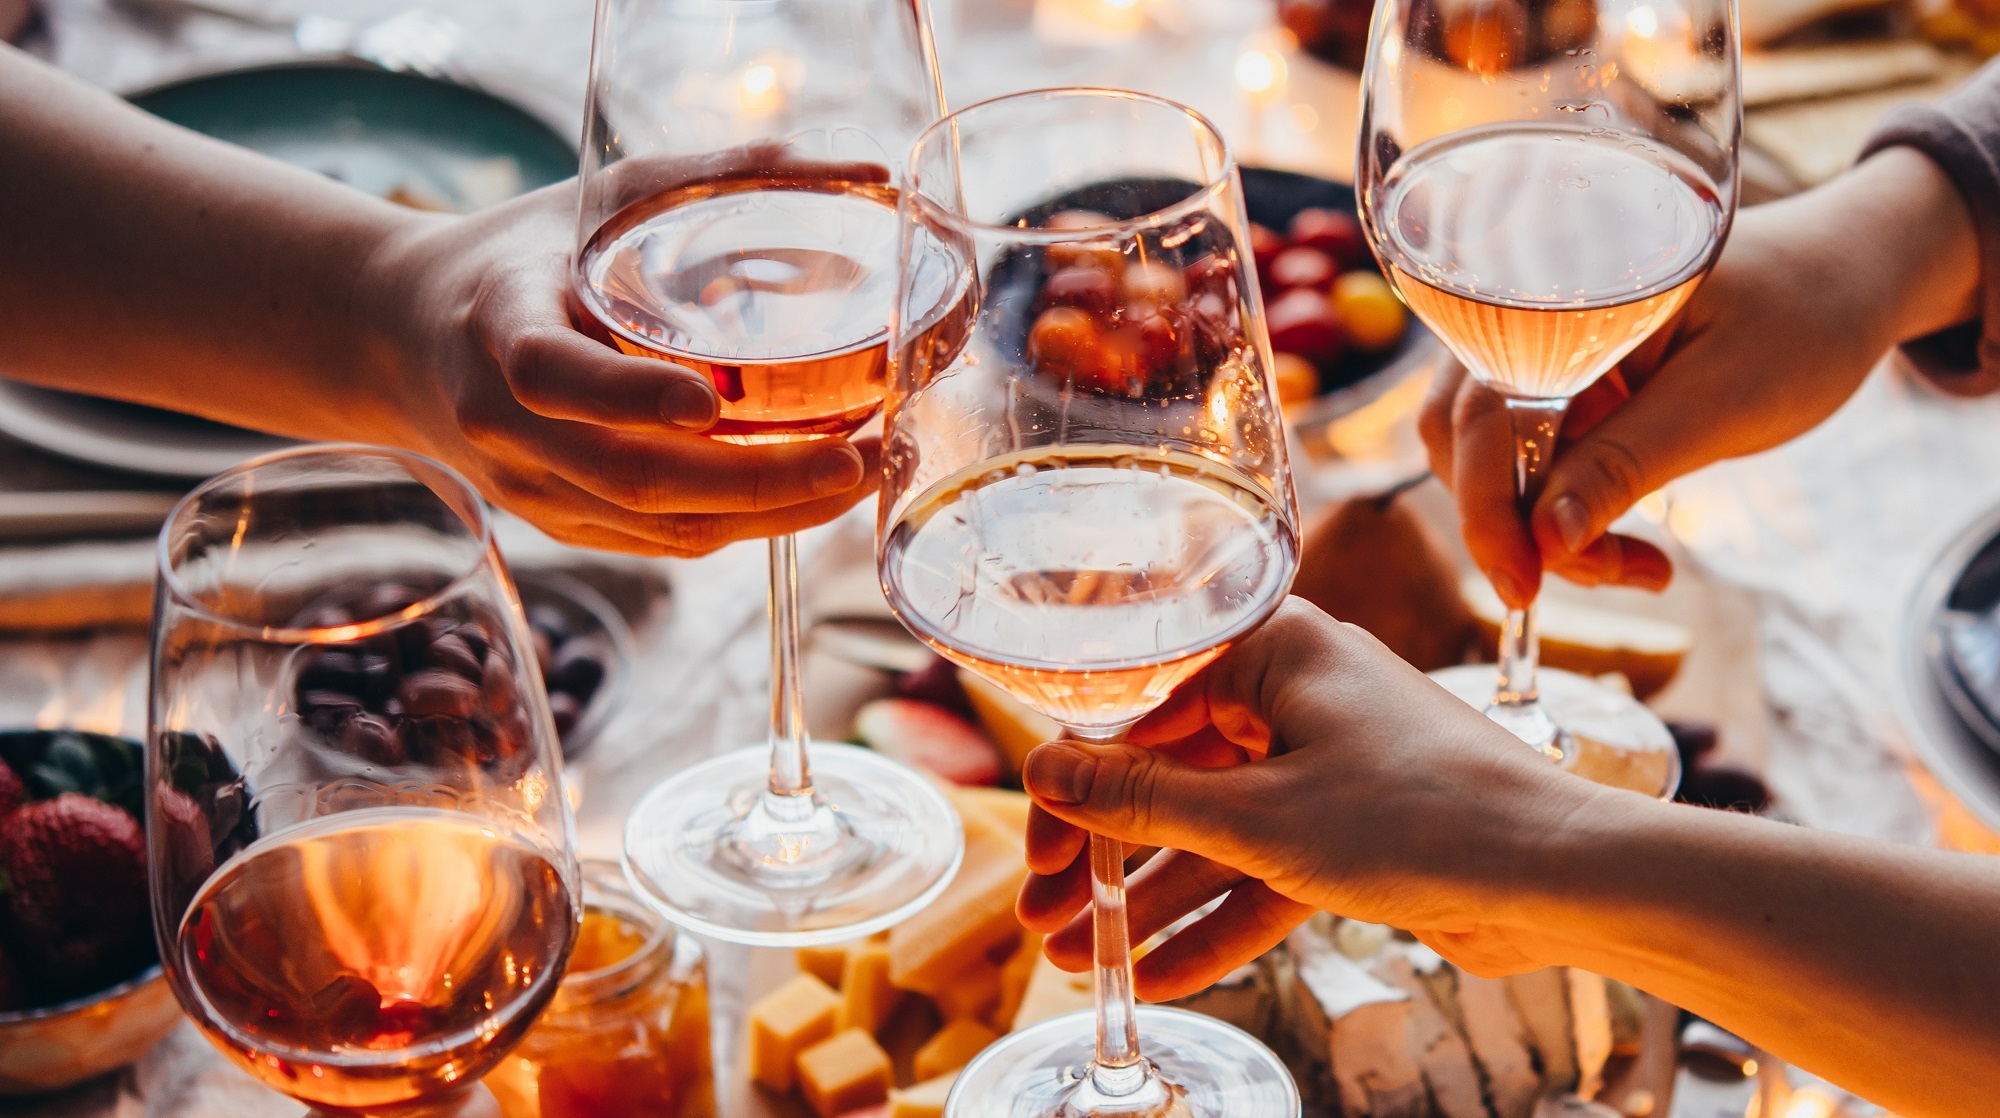 Read our top picks for summer wines